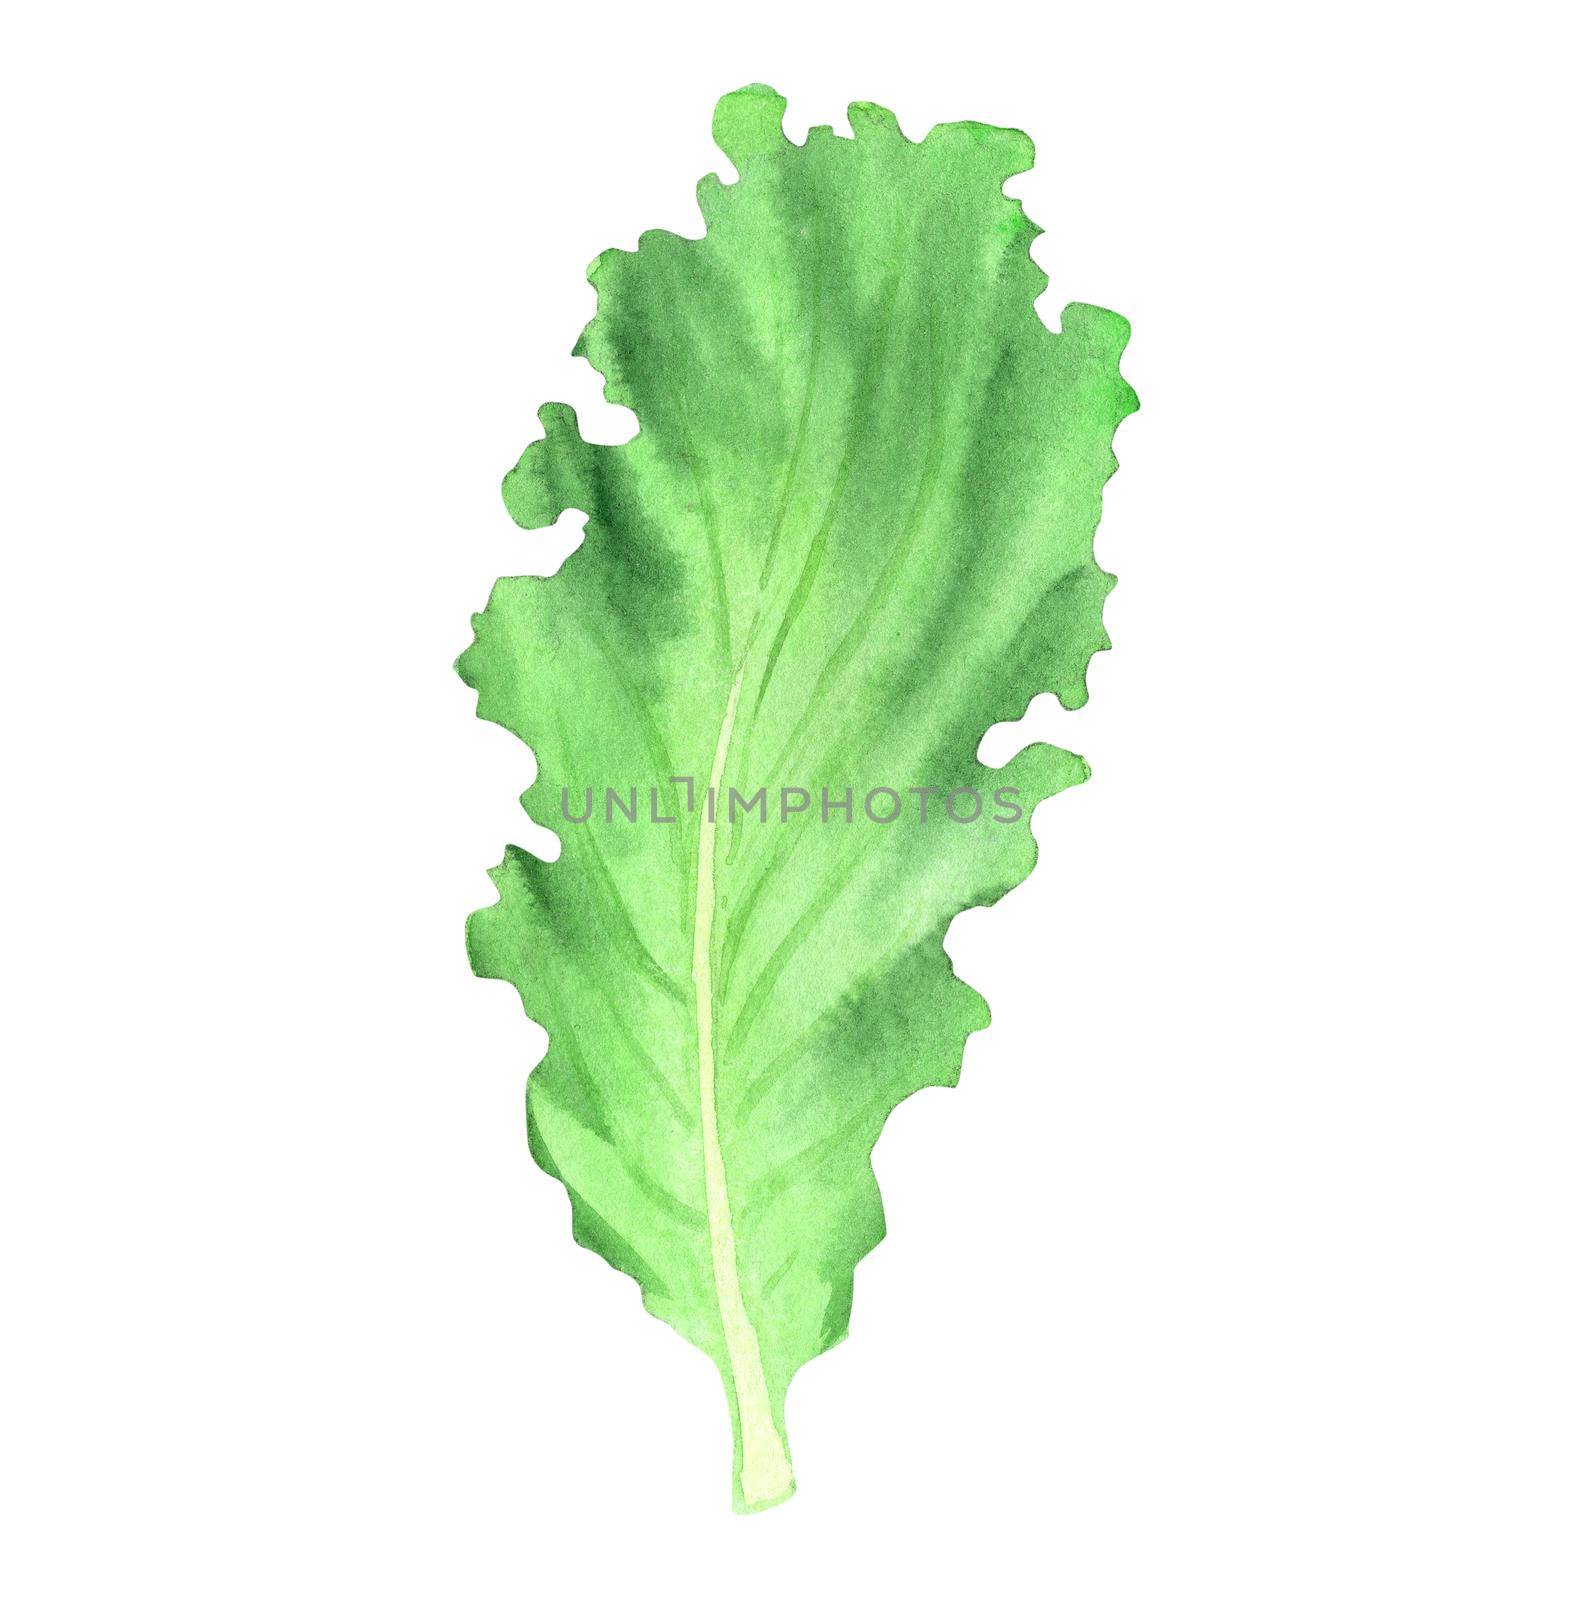 Watercolor green fresh lettuce leaf isolated on white background. Hand drawn salad illustration by dreamloud